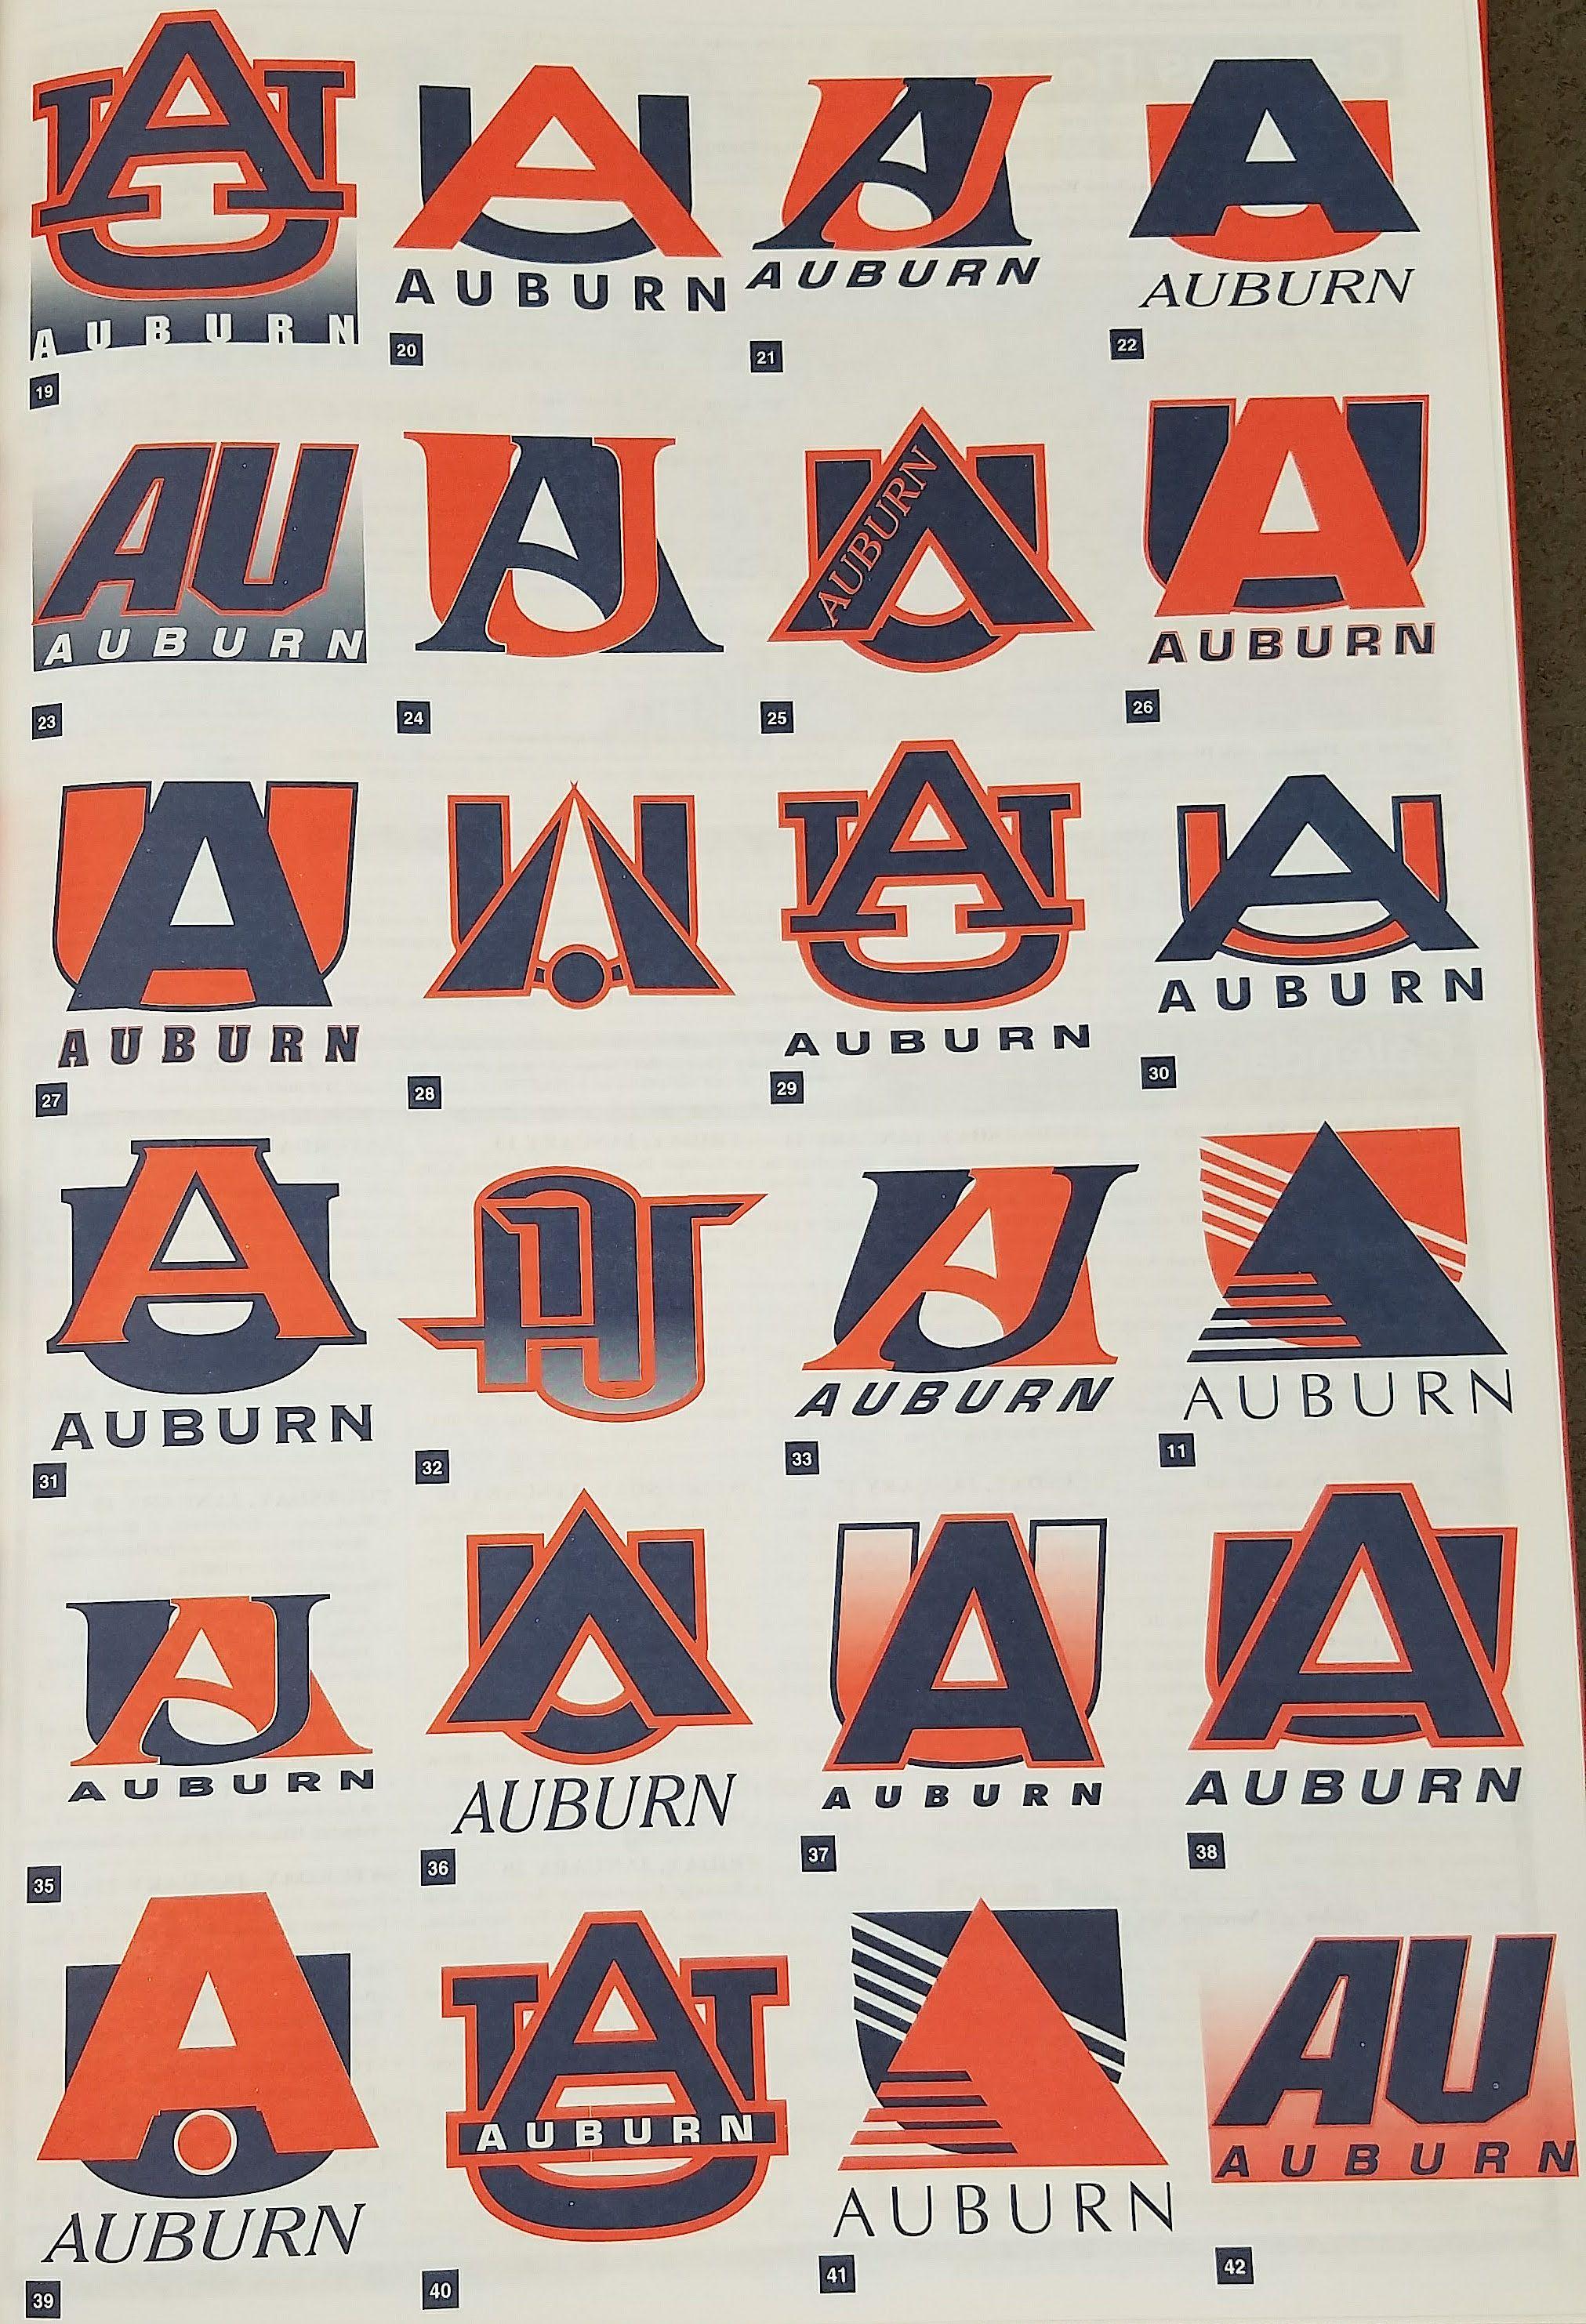 Auburn Logo - That time Auburn tried to replace the 'AU' logo and people went loco